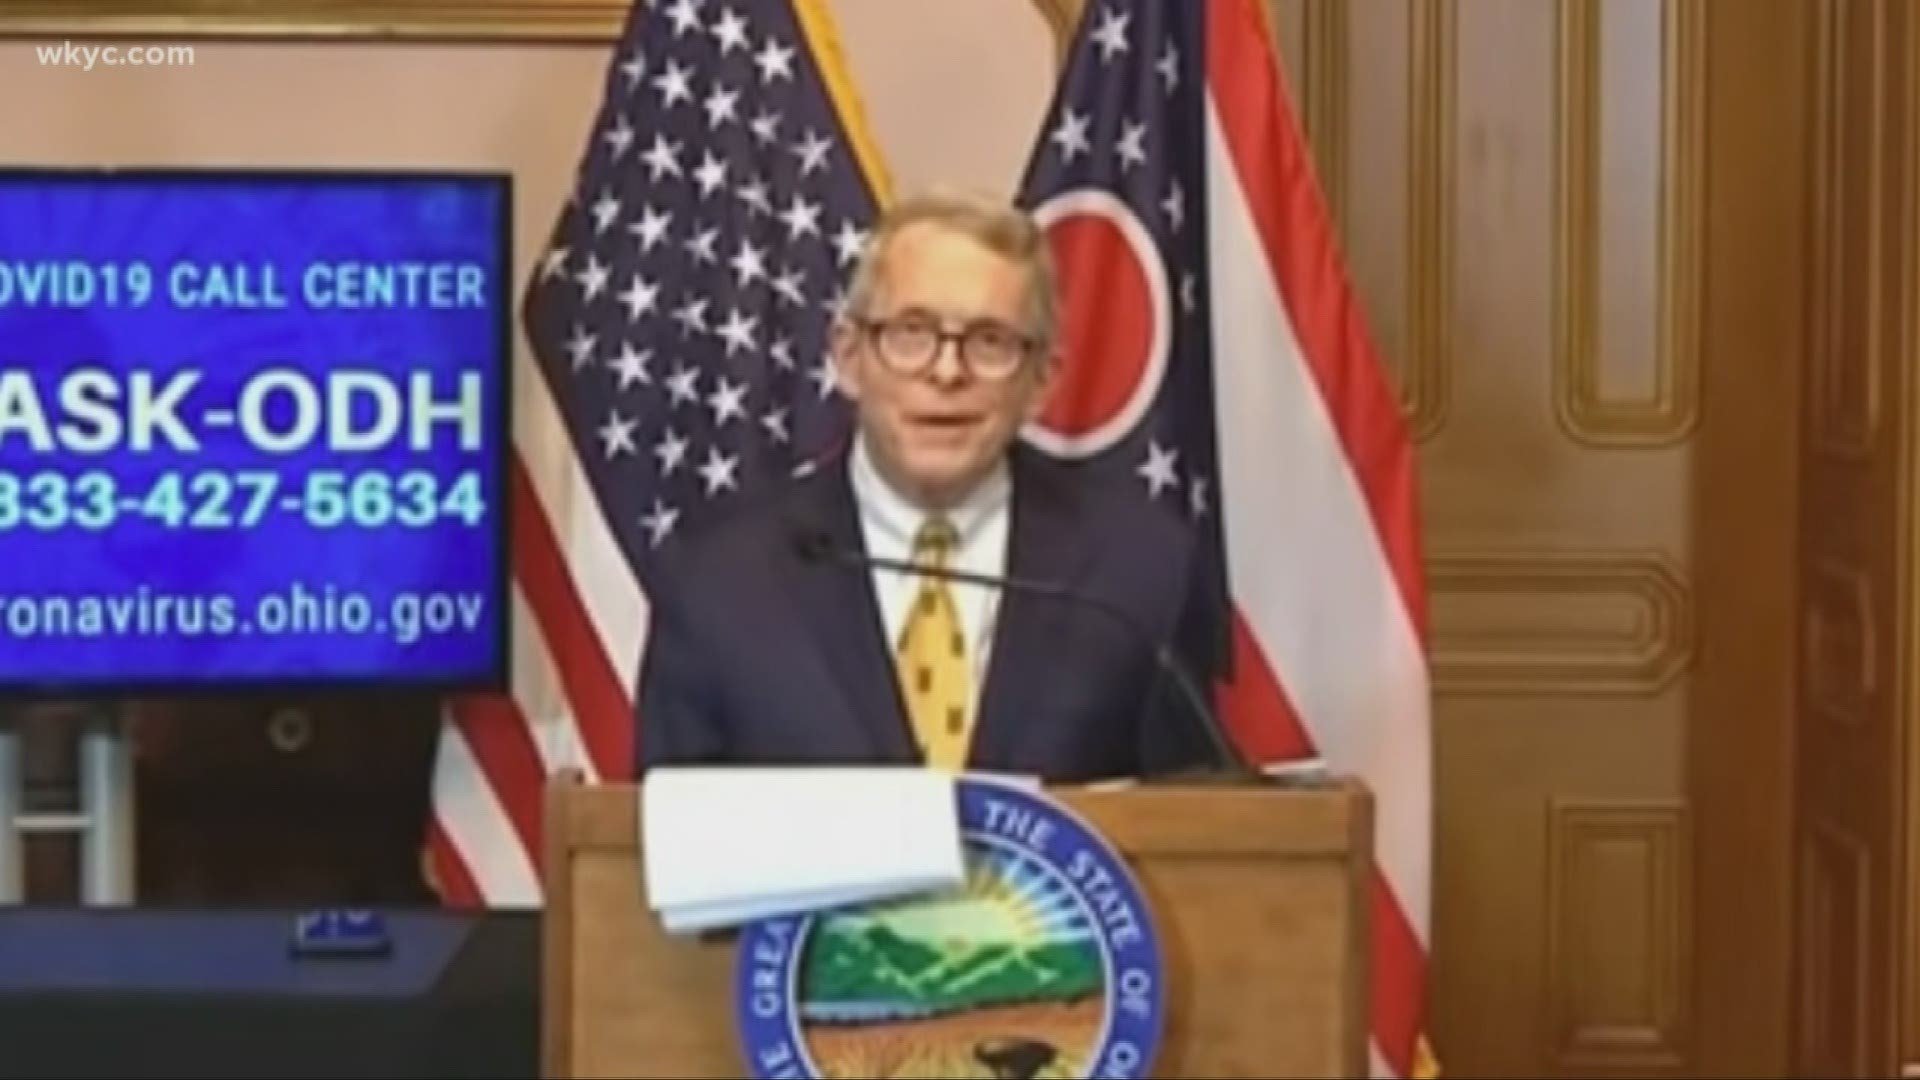 On Saturday, Governor Mike DeWine made two separate pleas. The first was to the private sector and the second was to the FDA.